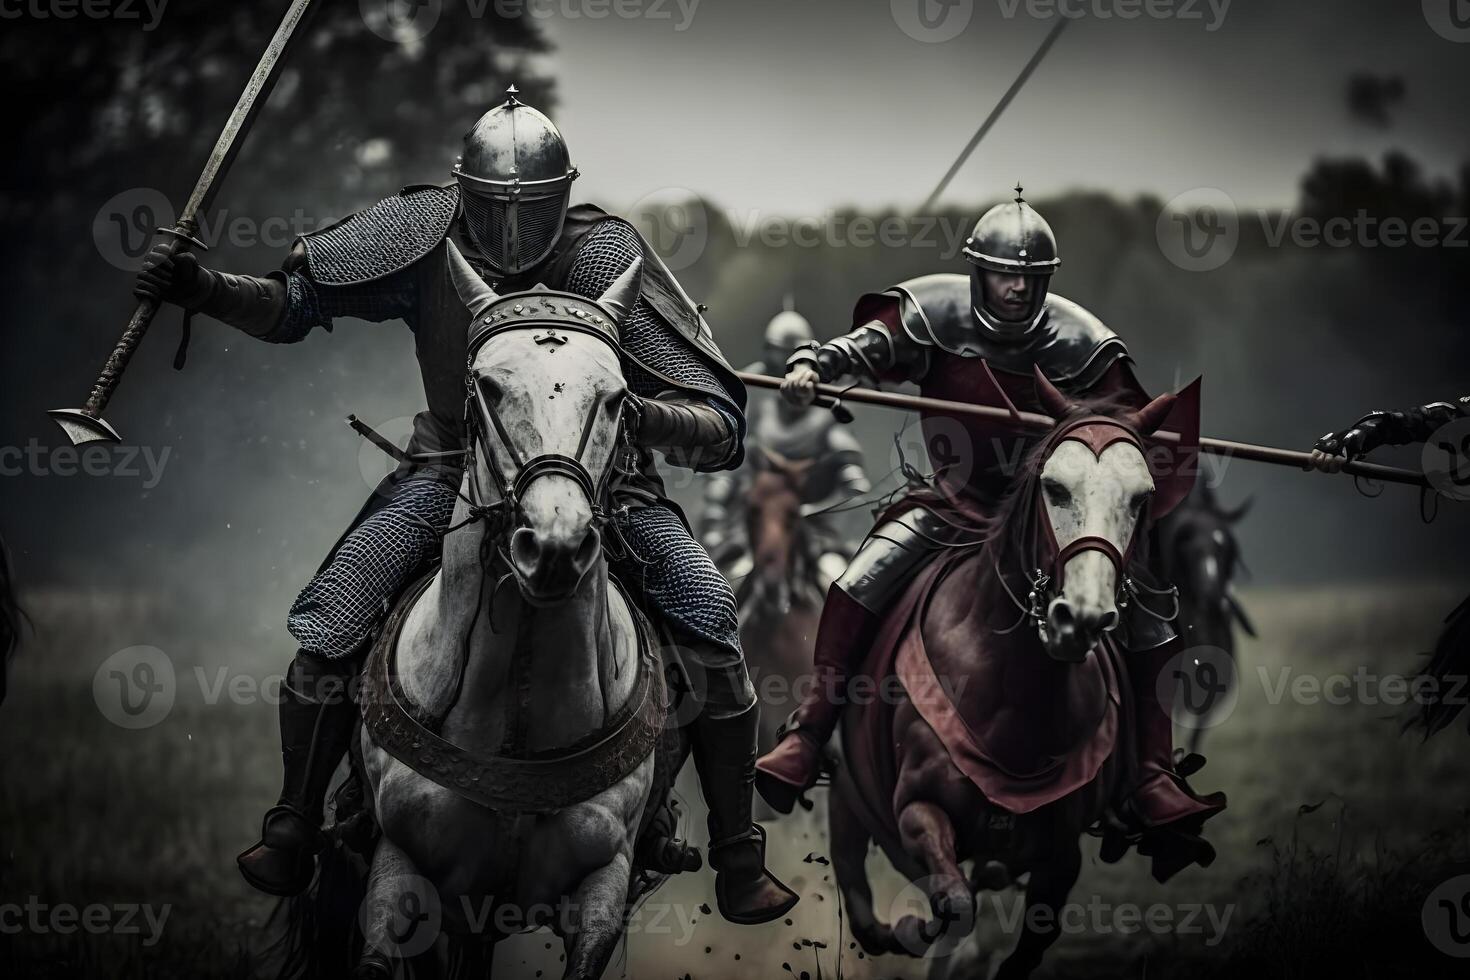 Epic Battlefield Armies of Medieval Knights Fighting with Swords. Neural network photo